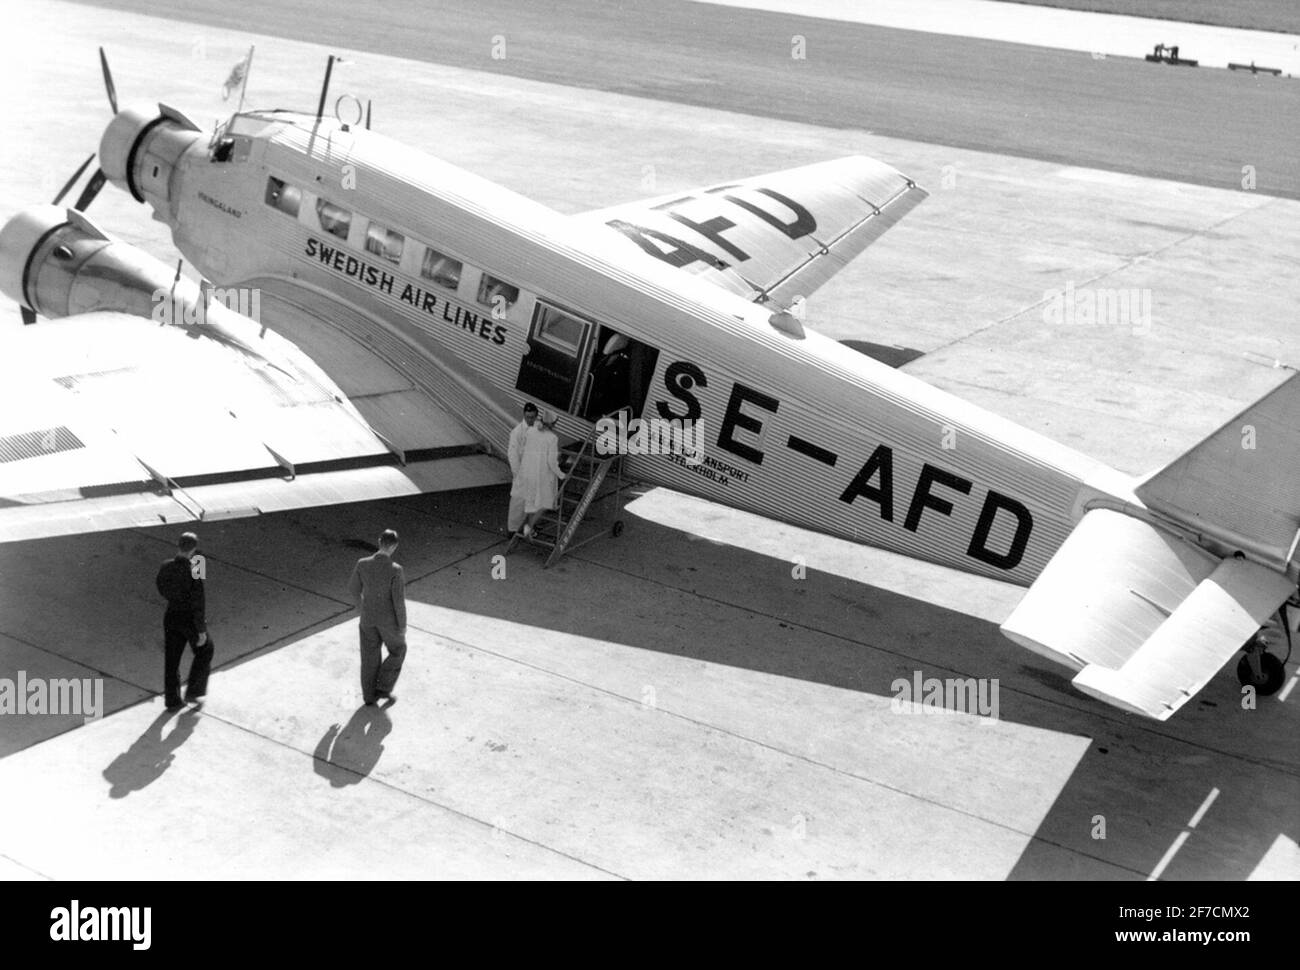 Passenger airplane Junkers Ju 52 Number SE-AFD at Bromma Airport, 1938  The company Aerotransports aircraft Junkers Ju 52 number SE-AFD from the side of Bromma airport. The image scanned from Alan Granston's album. Only digital file in FVM's ownership. Stock Photo